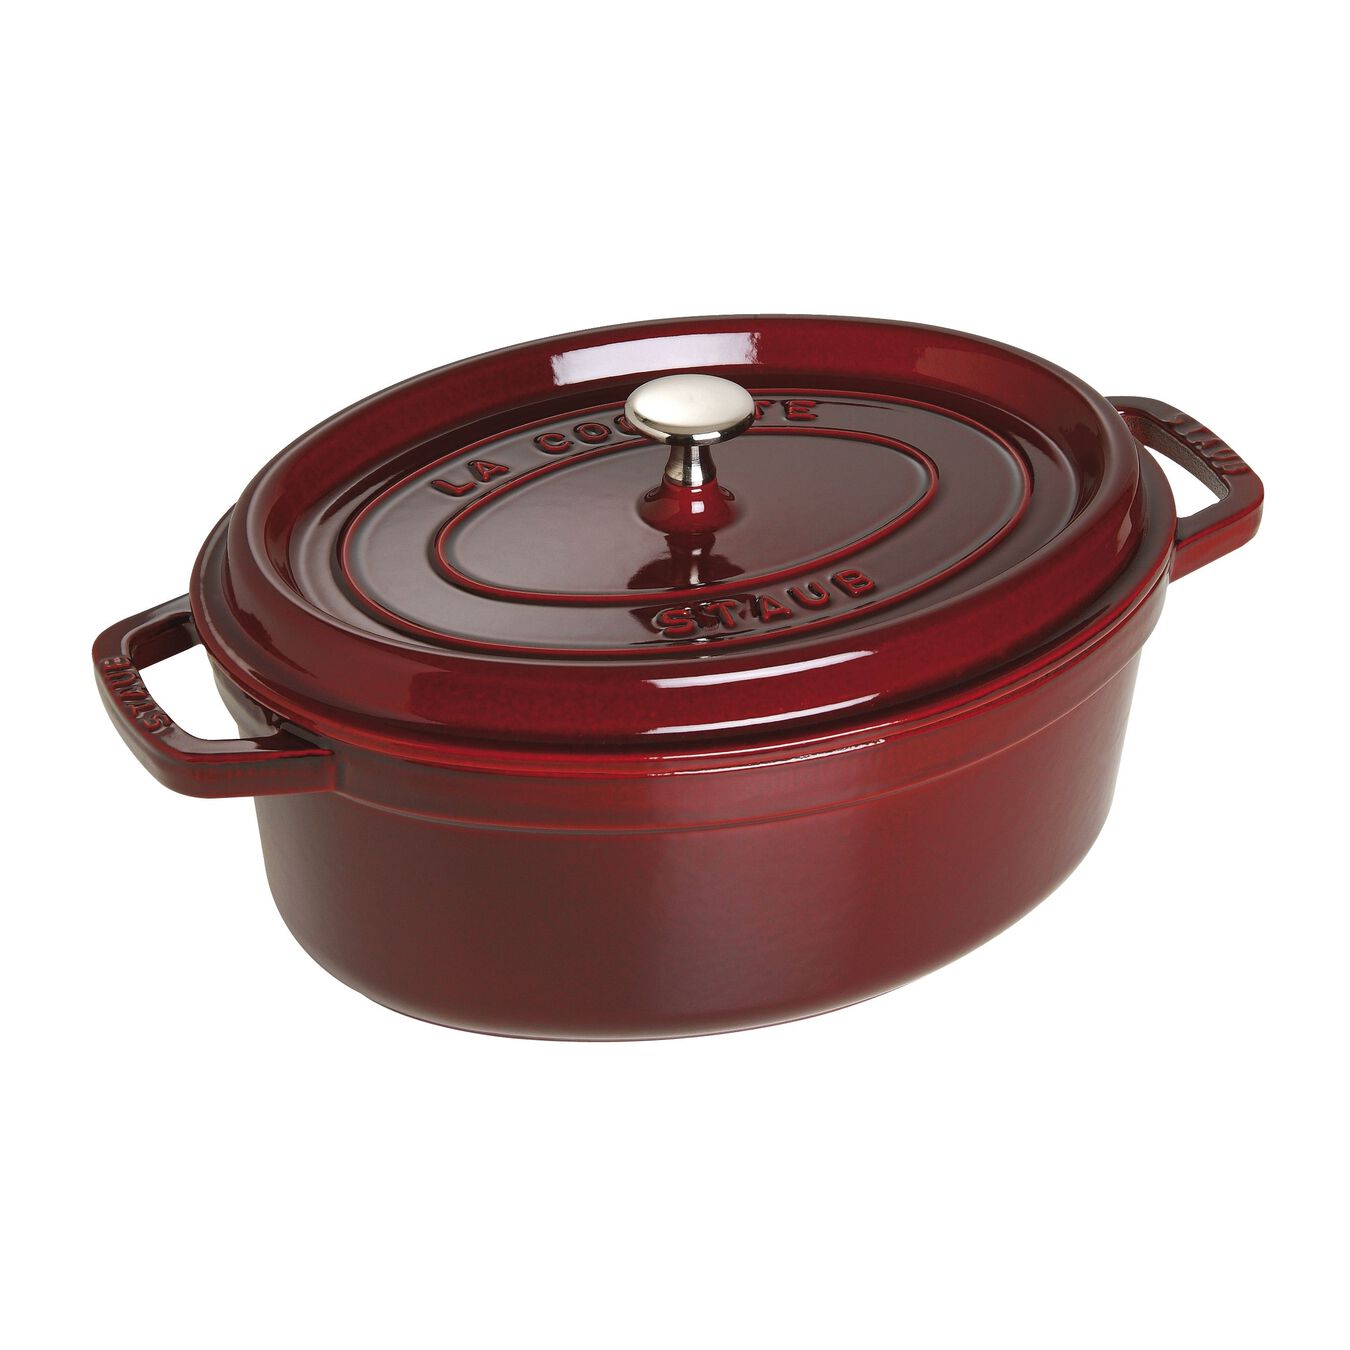 31 cm oval Cast iron Cocotte grenadine-red,,large 2